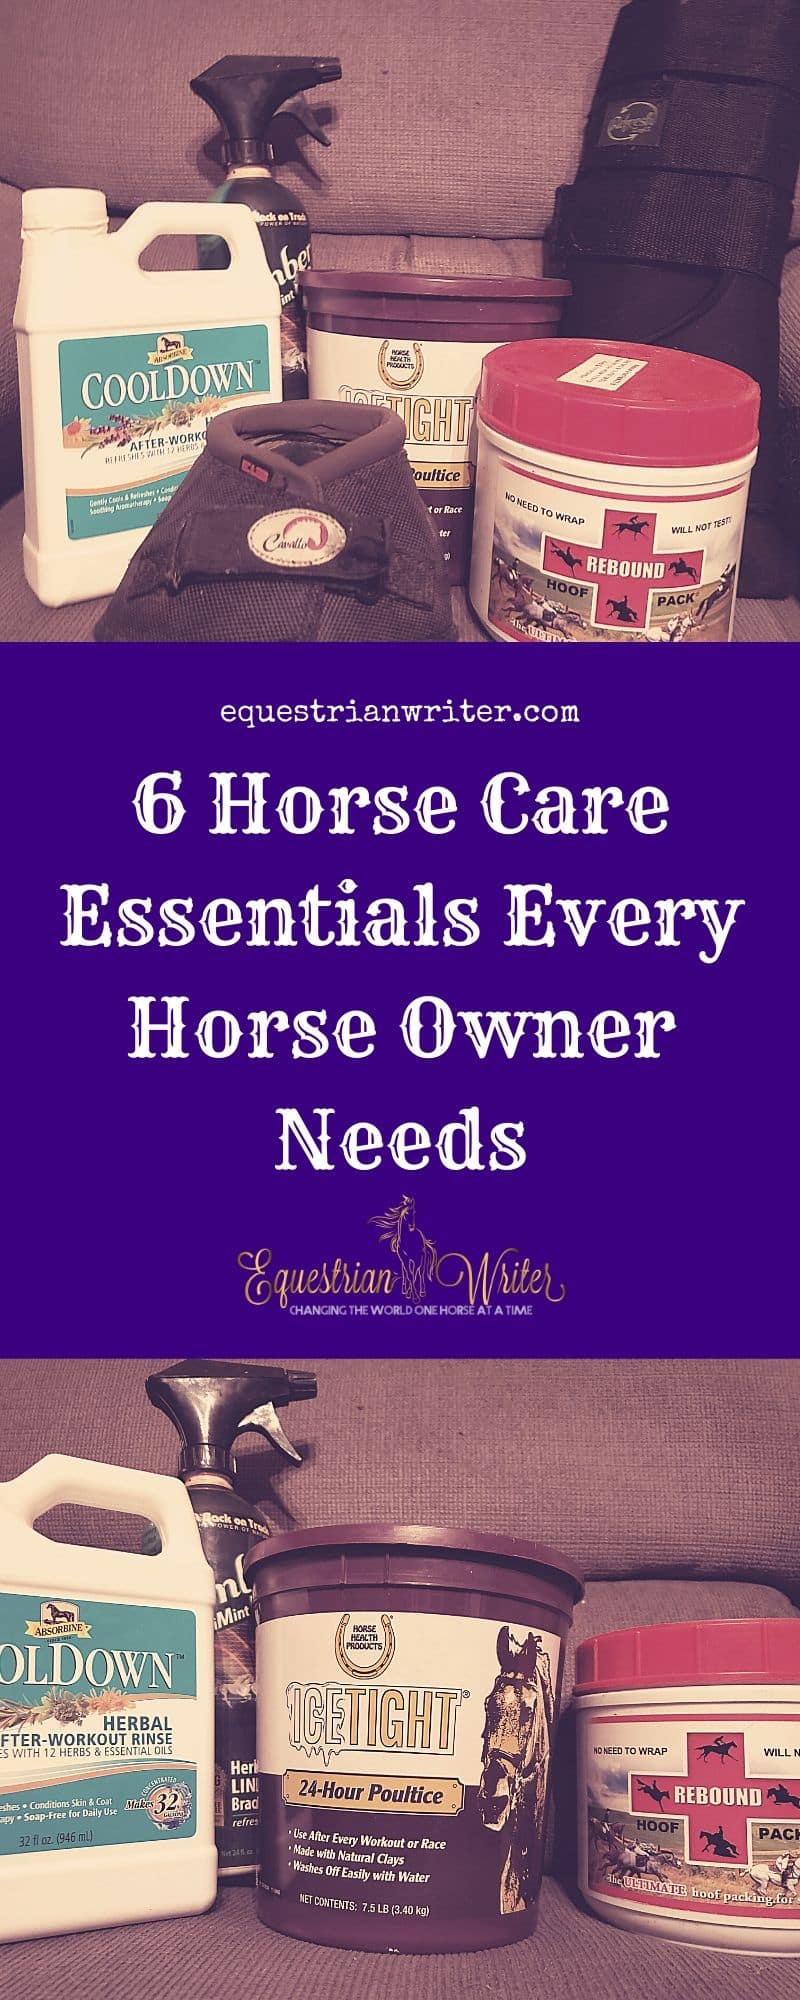 Horse Care Essentials Every Horse Owner Needs